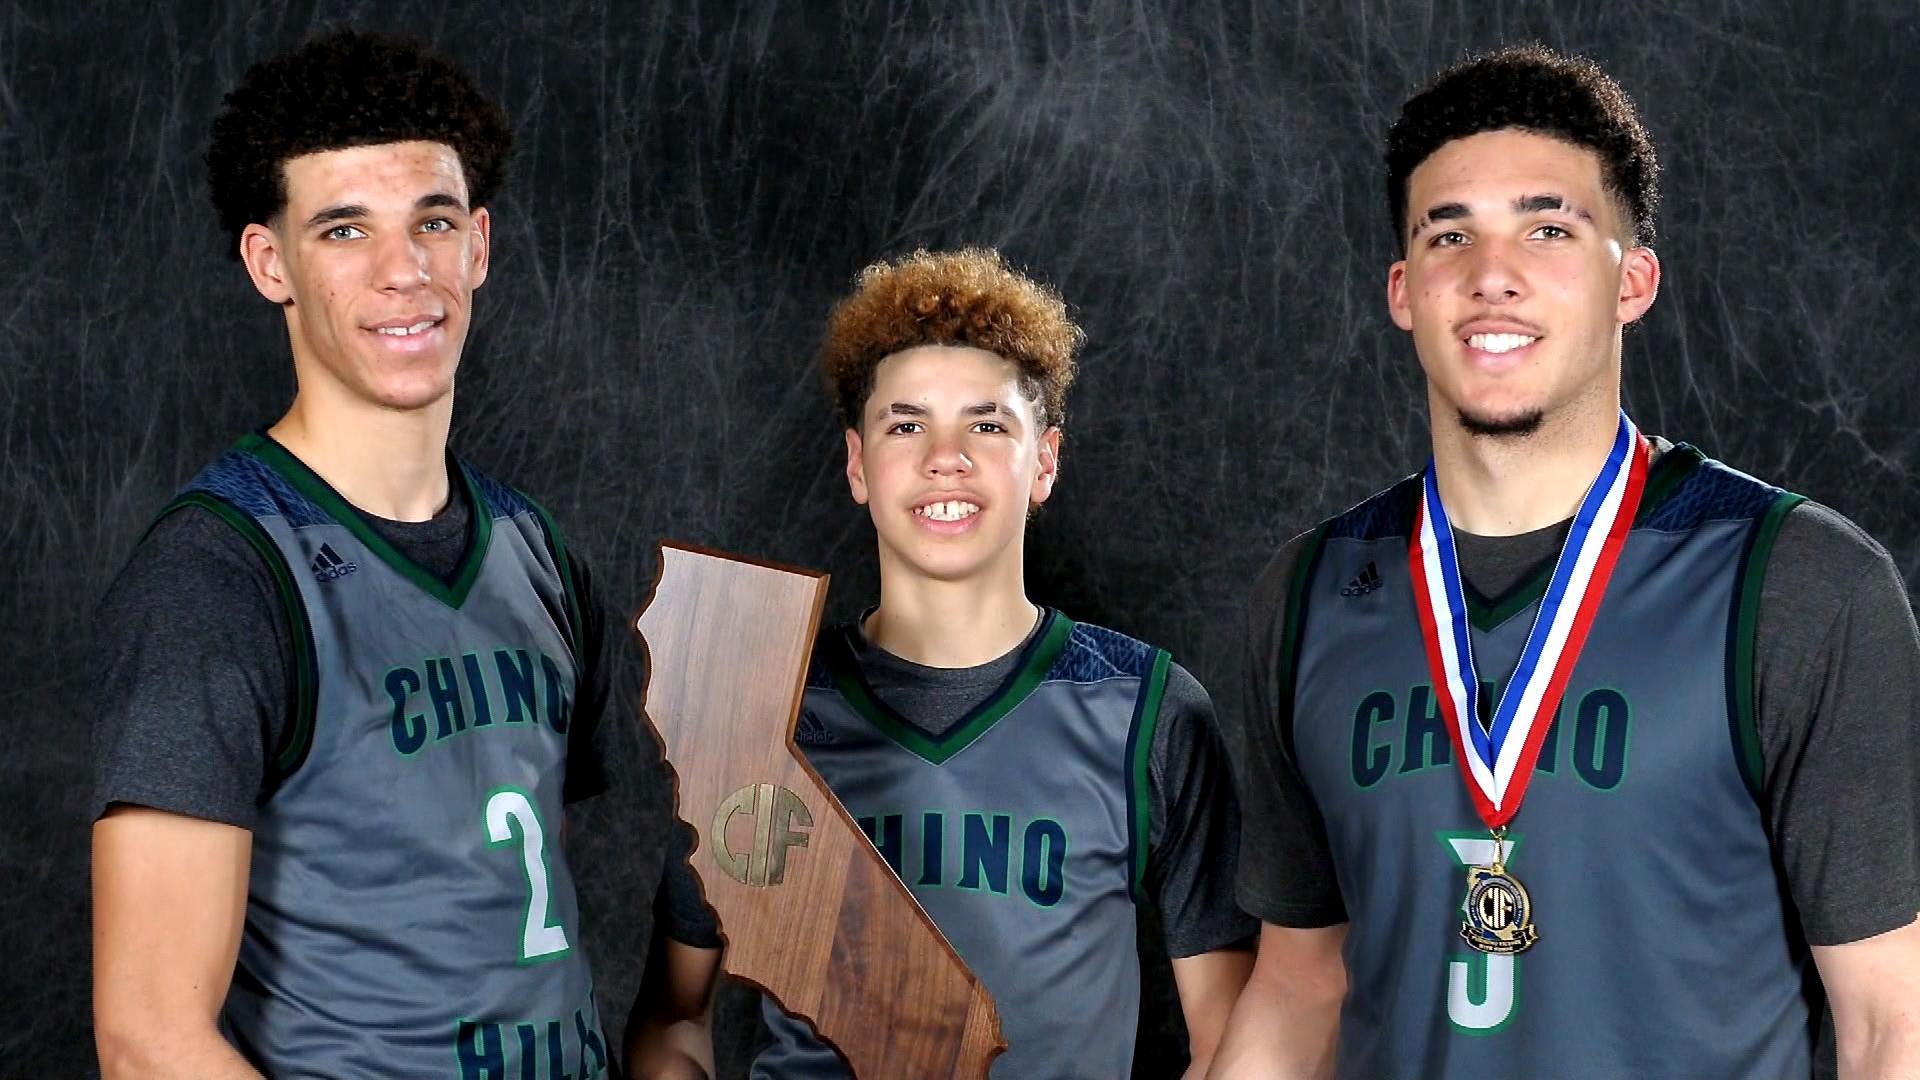 Watch CBS This Morning: Ball brothers rule basketball